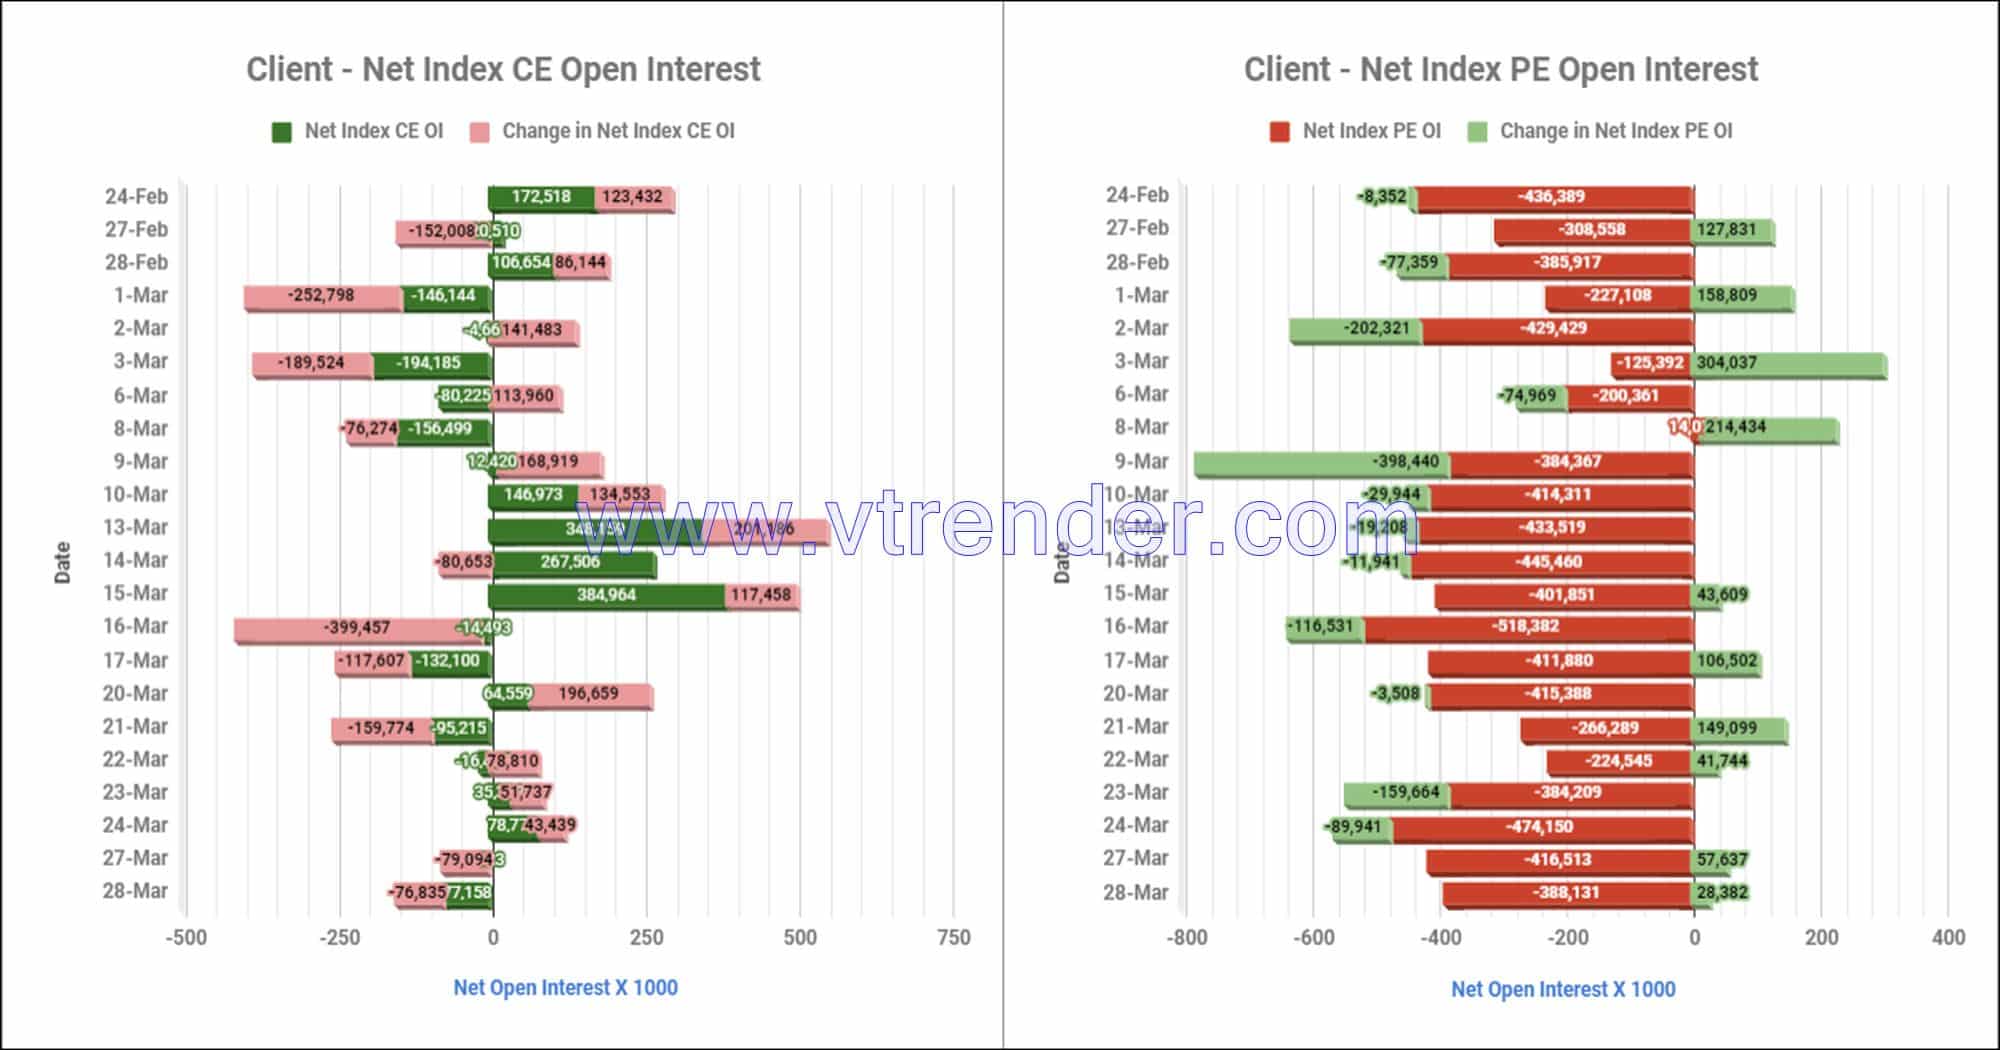 Clientinop28Mar Participantwise Net Open Interest And Net Equity Investments – 28Th Mar 2023 Client, Equity, Fii, Index Futures, Index Options, Open Interest, Prop